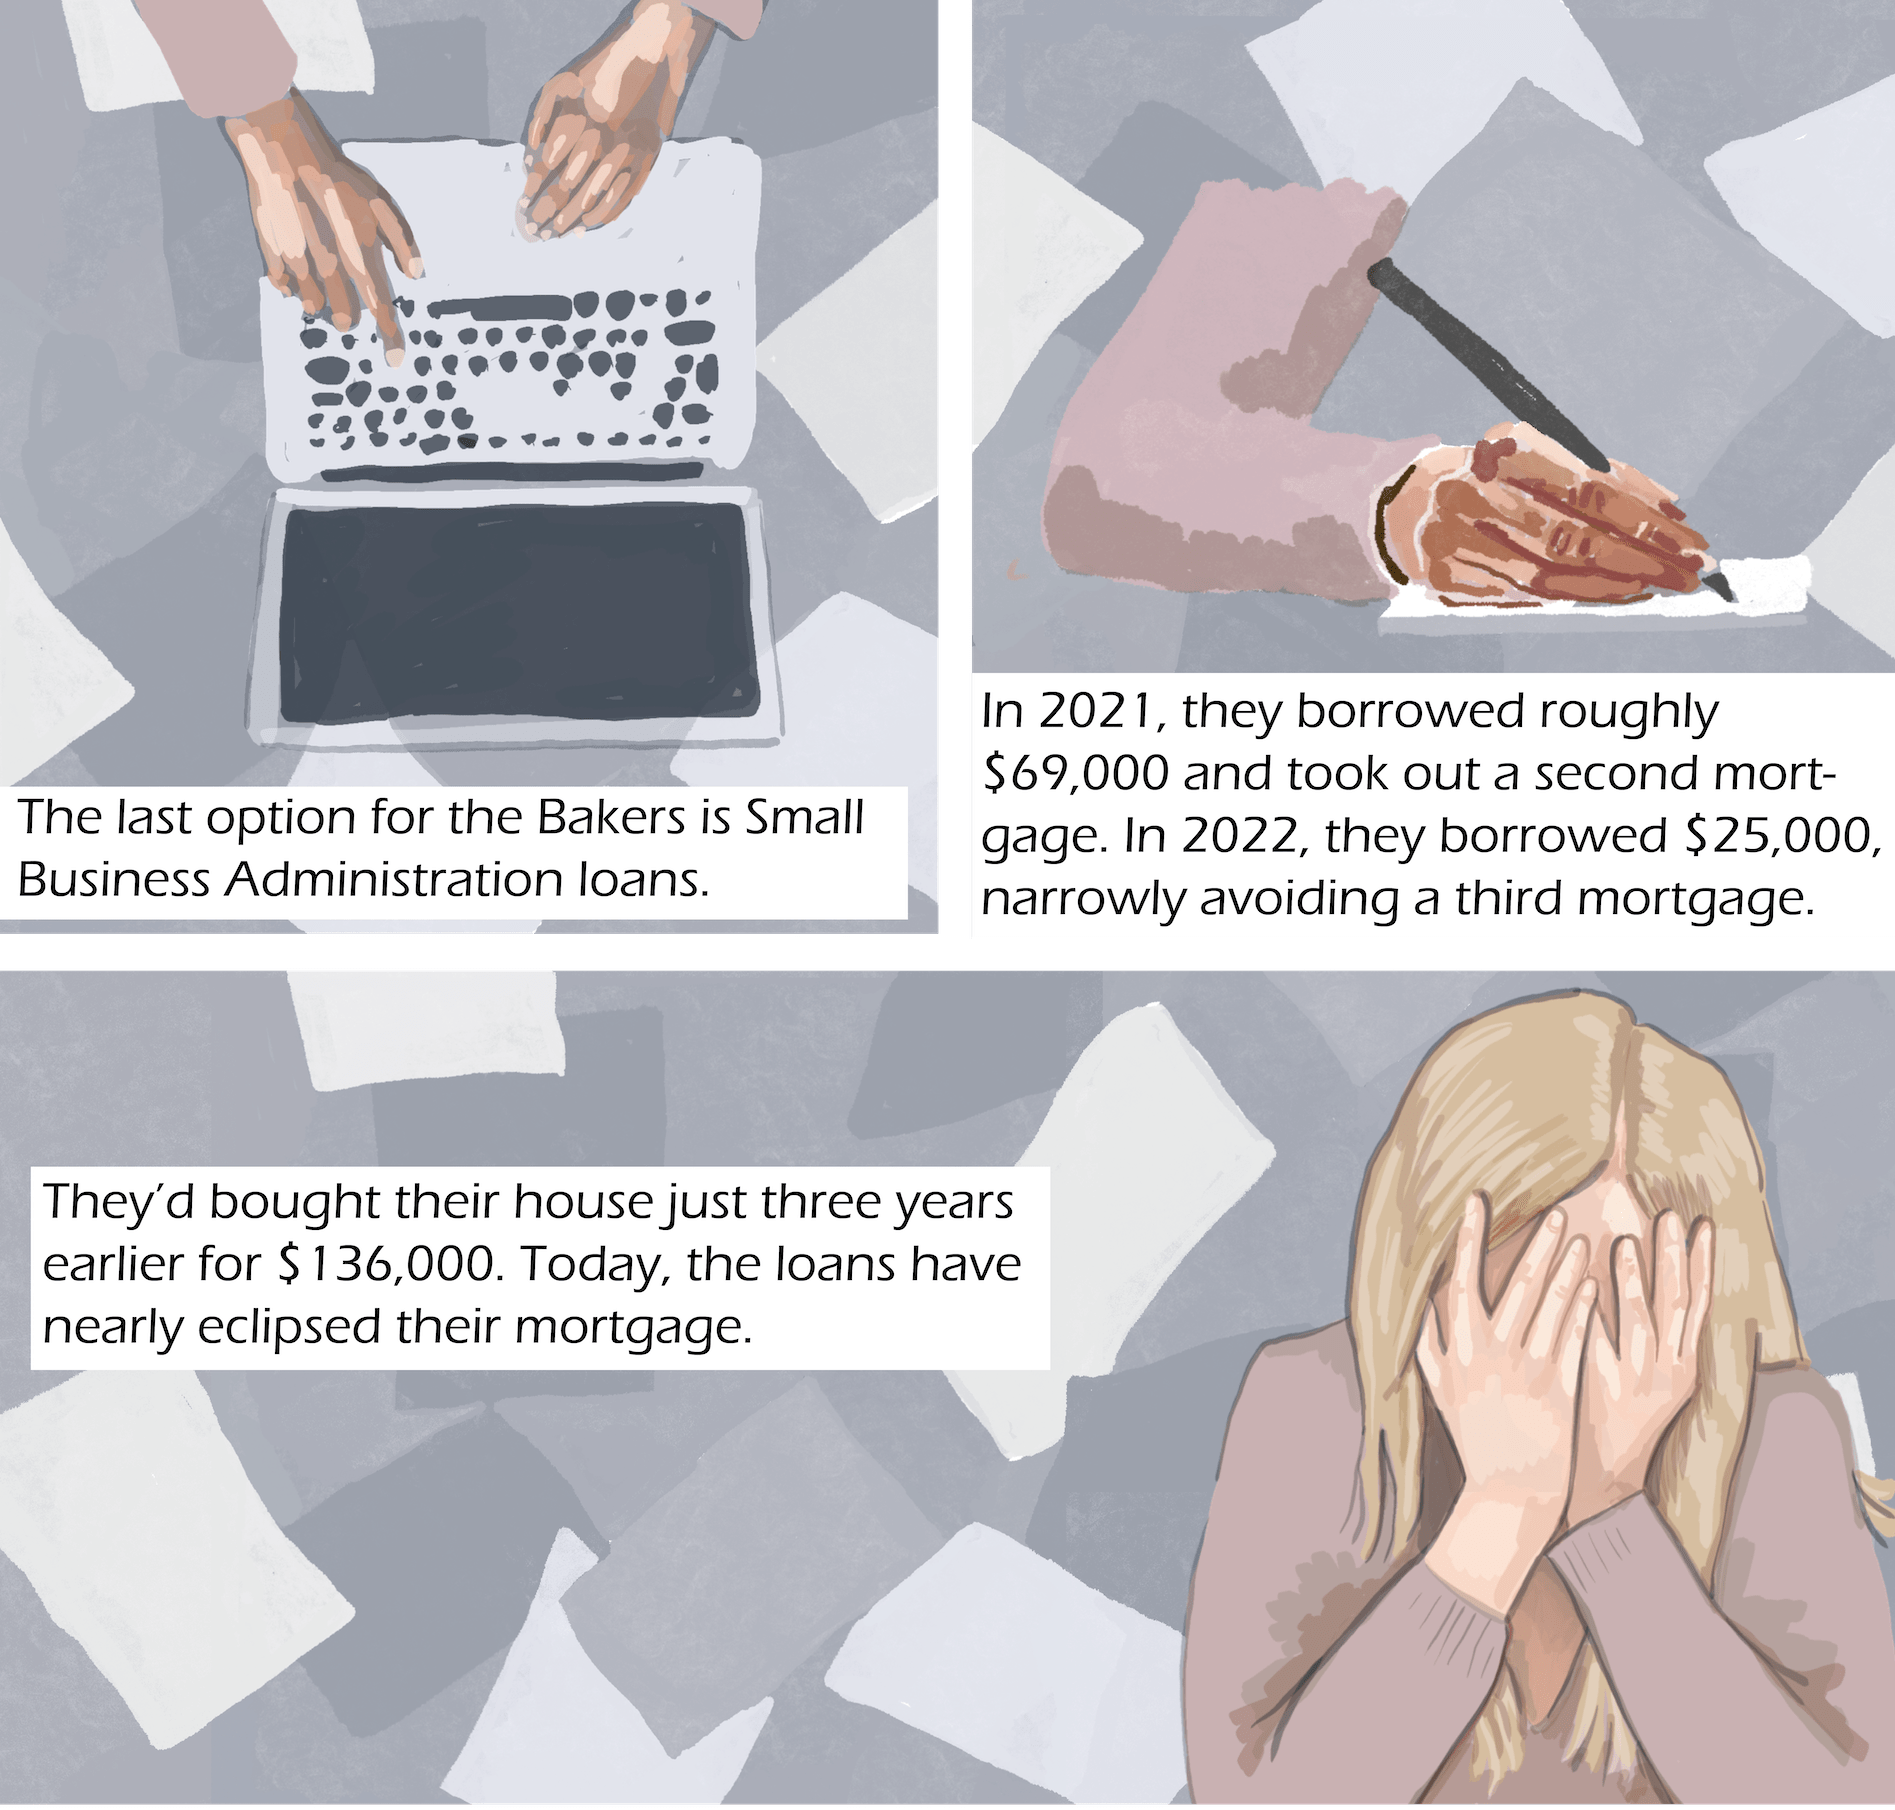 three images: An overview of hands typing on a laptop, a hand holding a pen and writing on a sheet of paper, a blonde woman covering her face with her hands; Text: